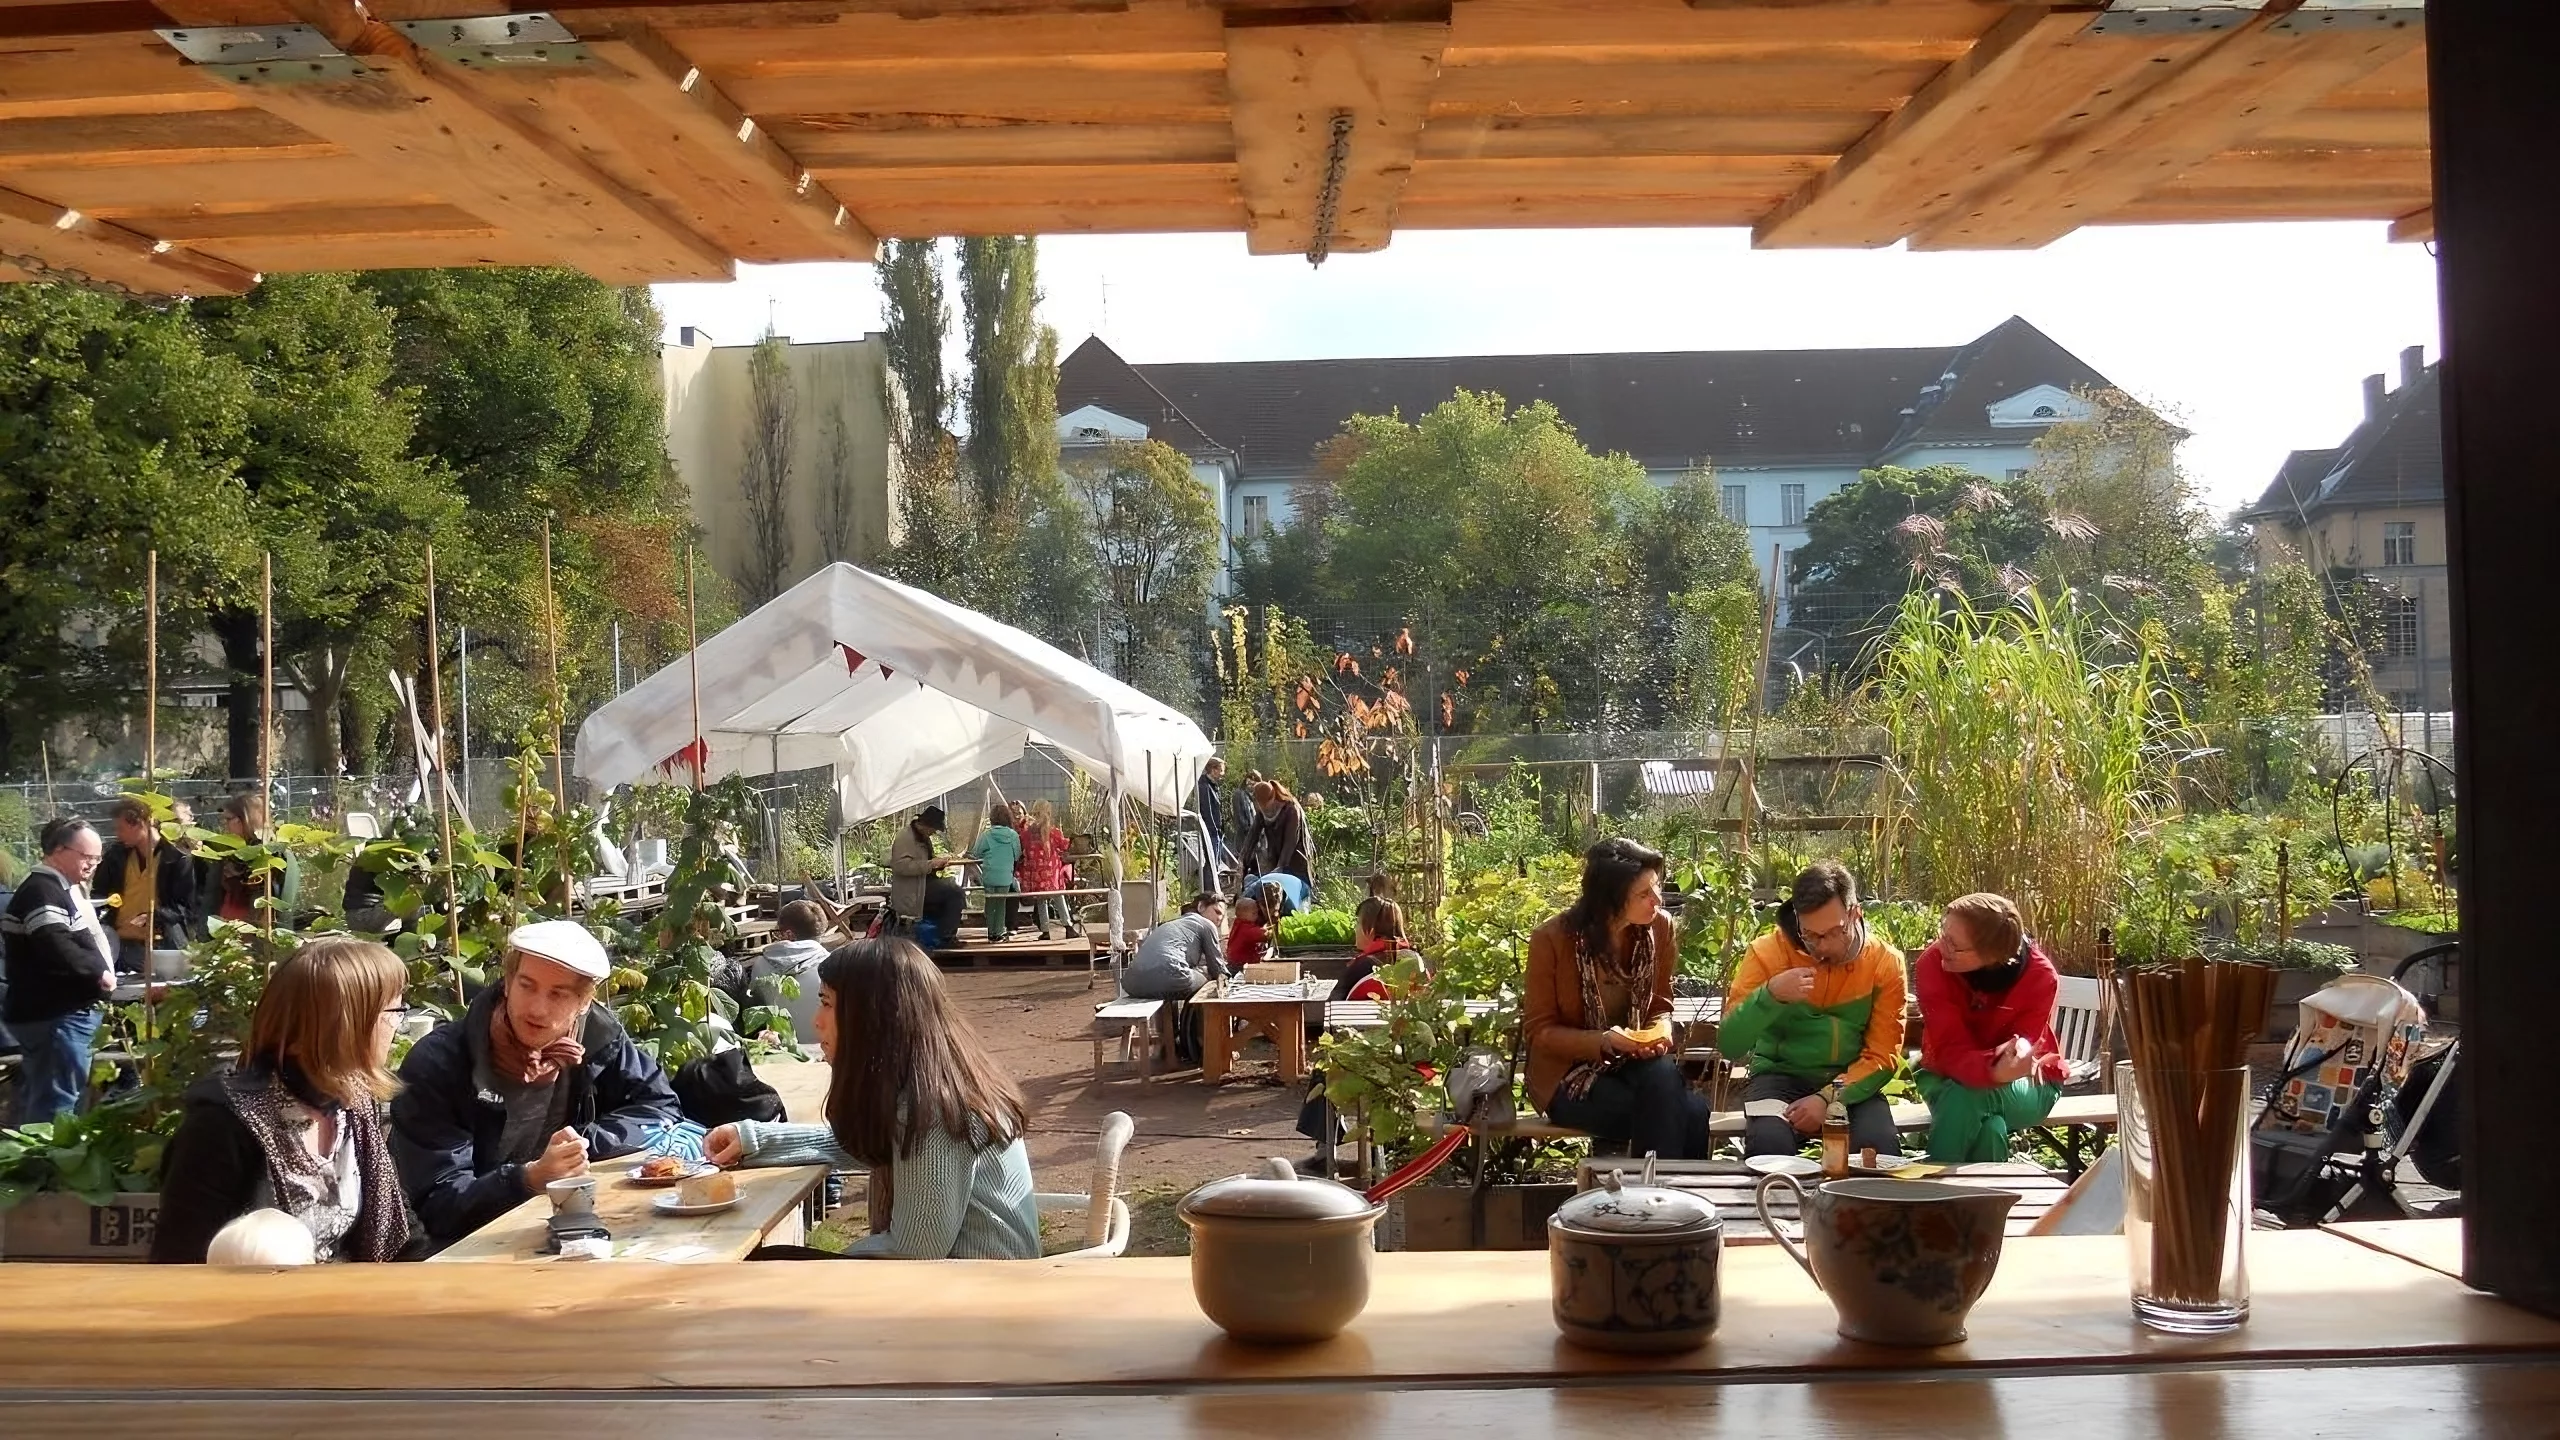 Incorporating Communal Cooking and Eating into Community Gardens Spaces